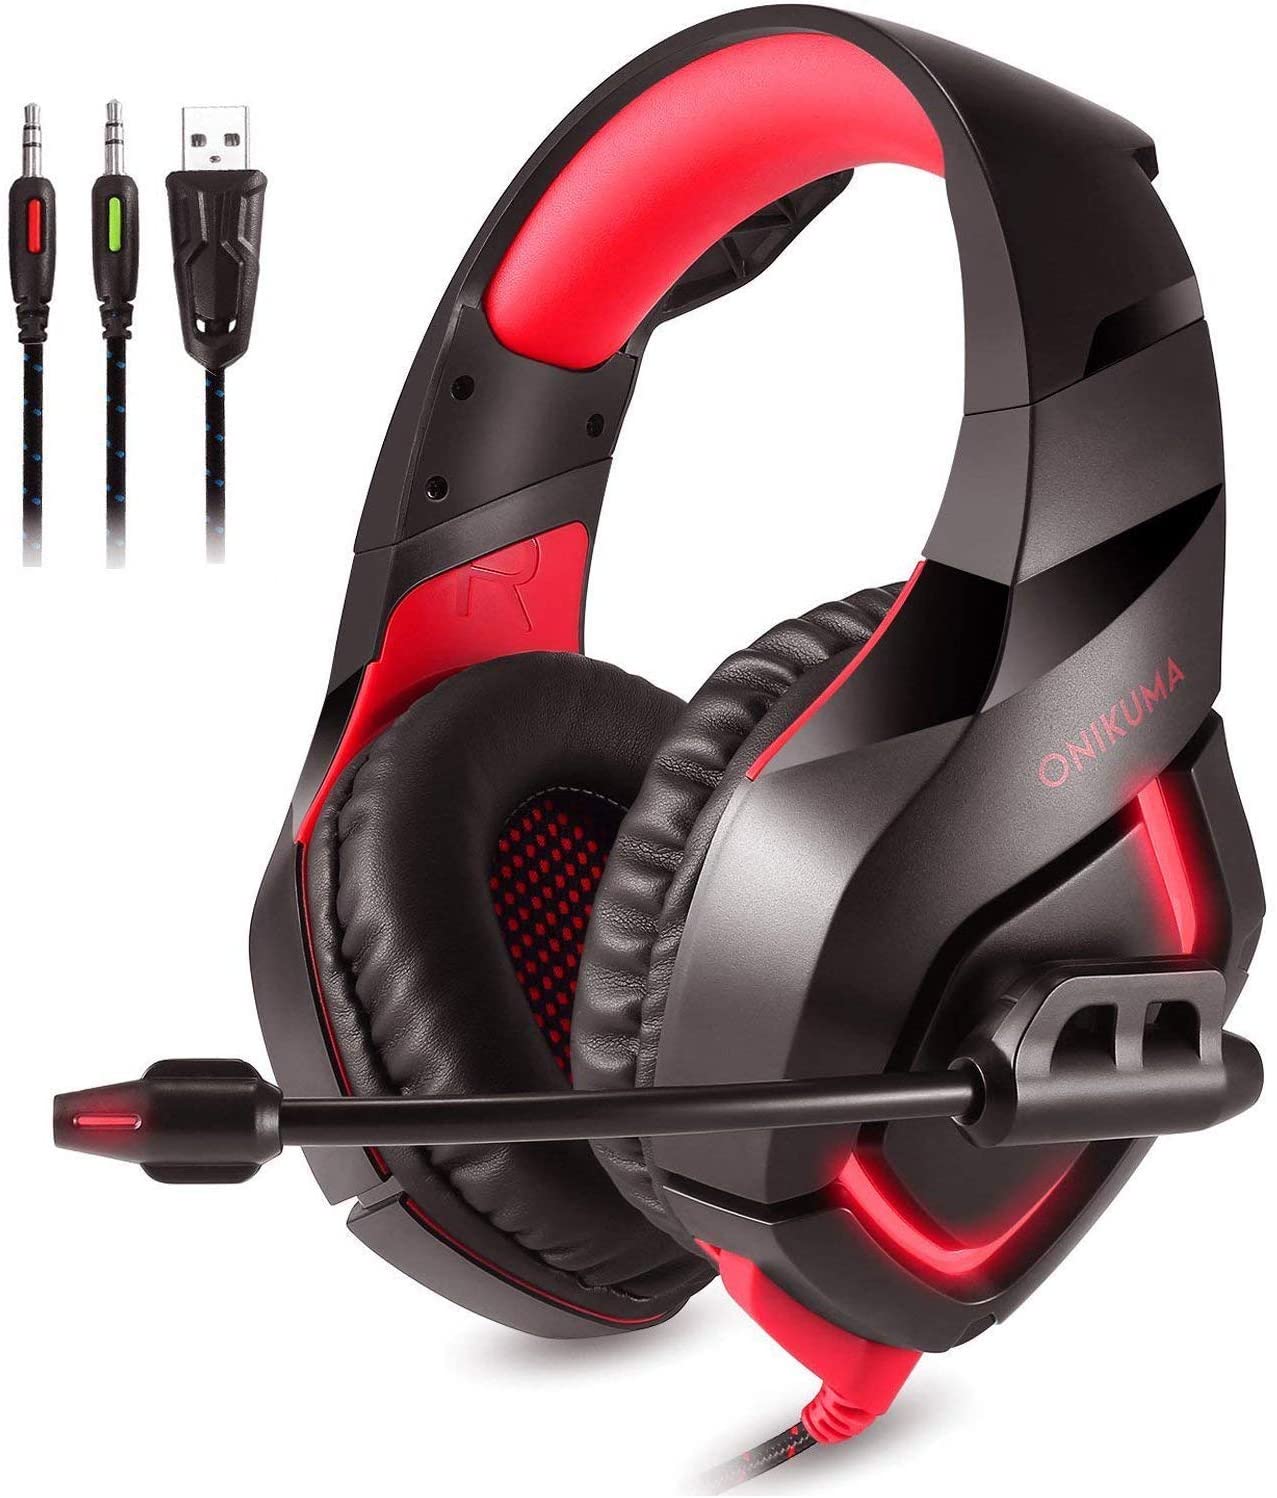 K1 Headphones, Stereo Gaming Headset Compatible with PC PS4 Xbox One Controller Nintendo,Over Ear Headphones with Noise Canceling Microphone,Soft Memory Earmuffs for Laptop Mac (K1-b red)